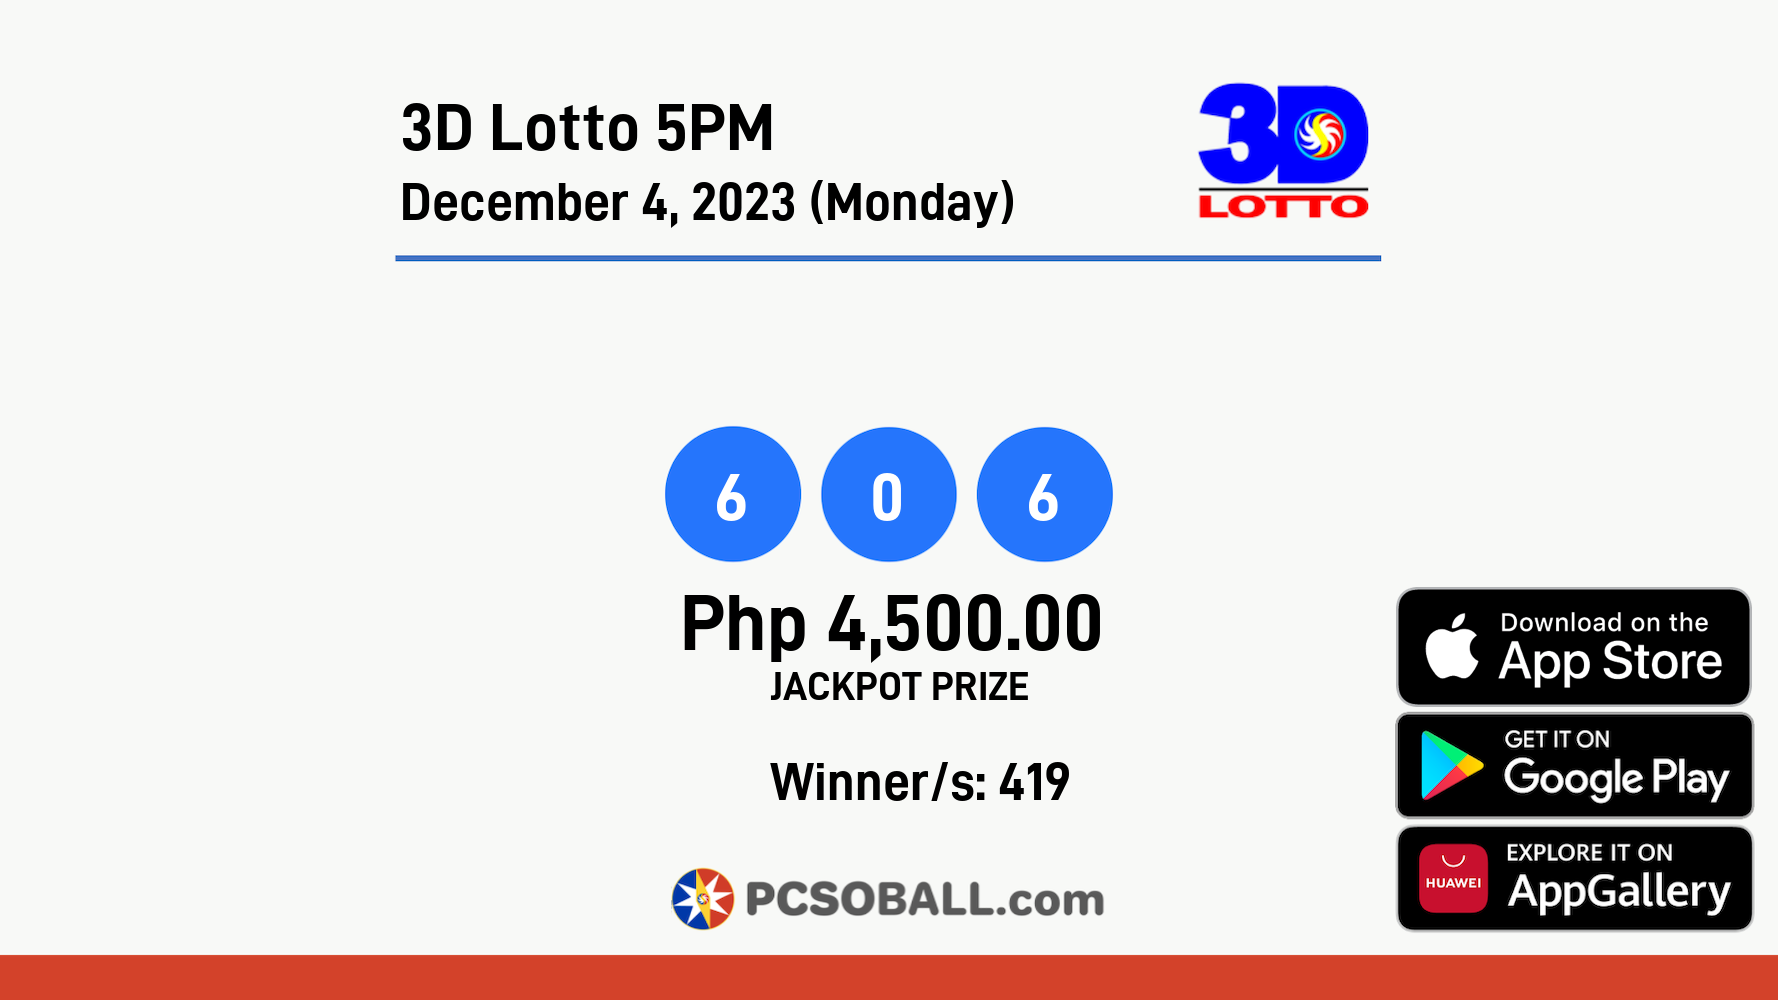 3D Lotto 5PM December 4, 2023 (Monday) Result